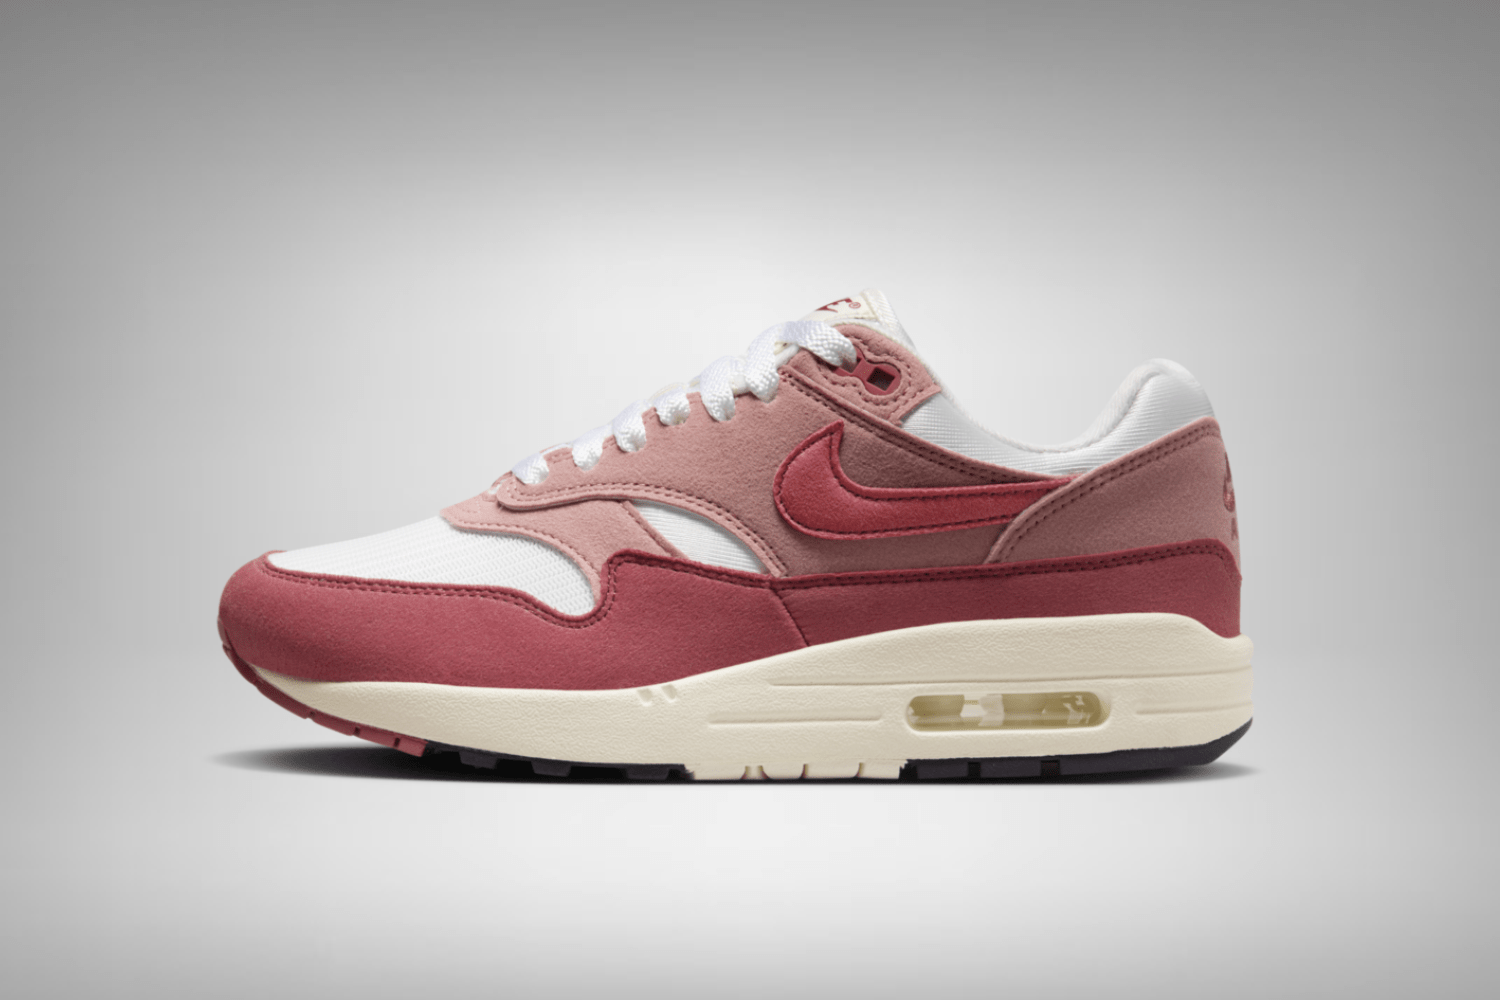 The Nike Air Max 1 appears in a 'Red Stardust' colorway